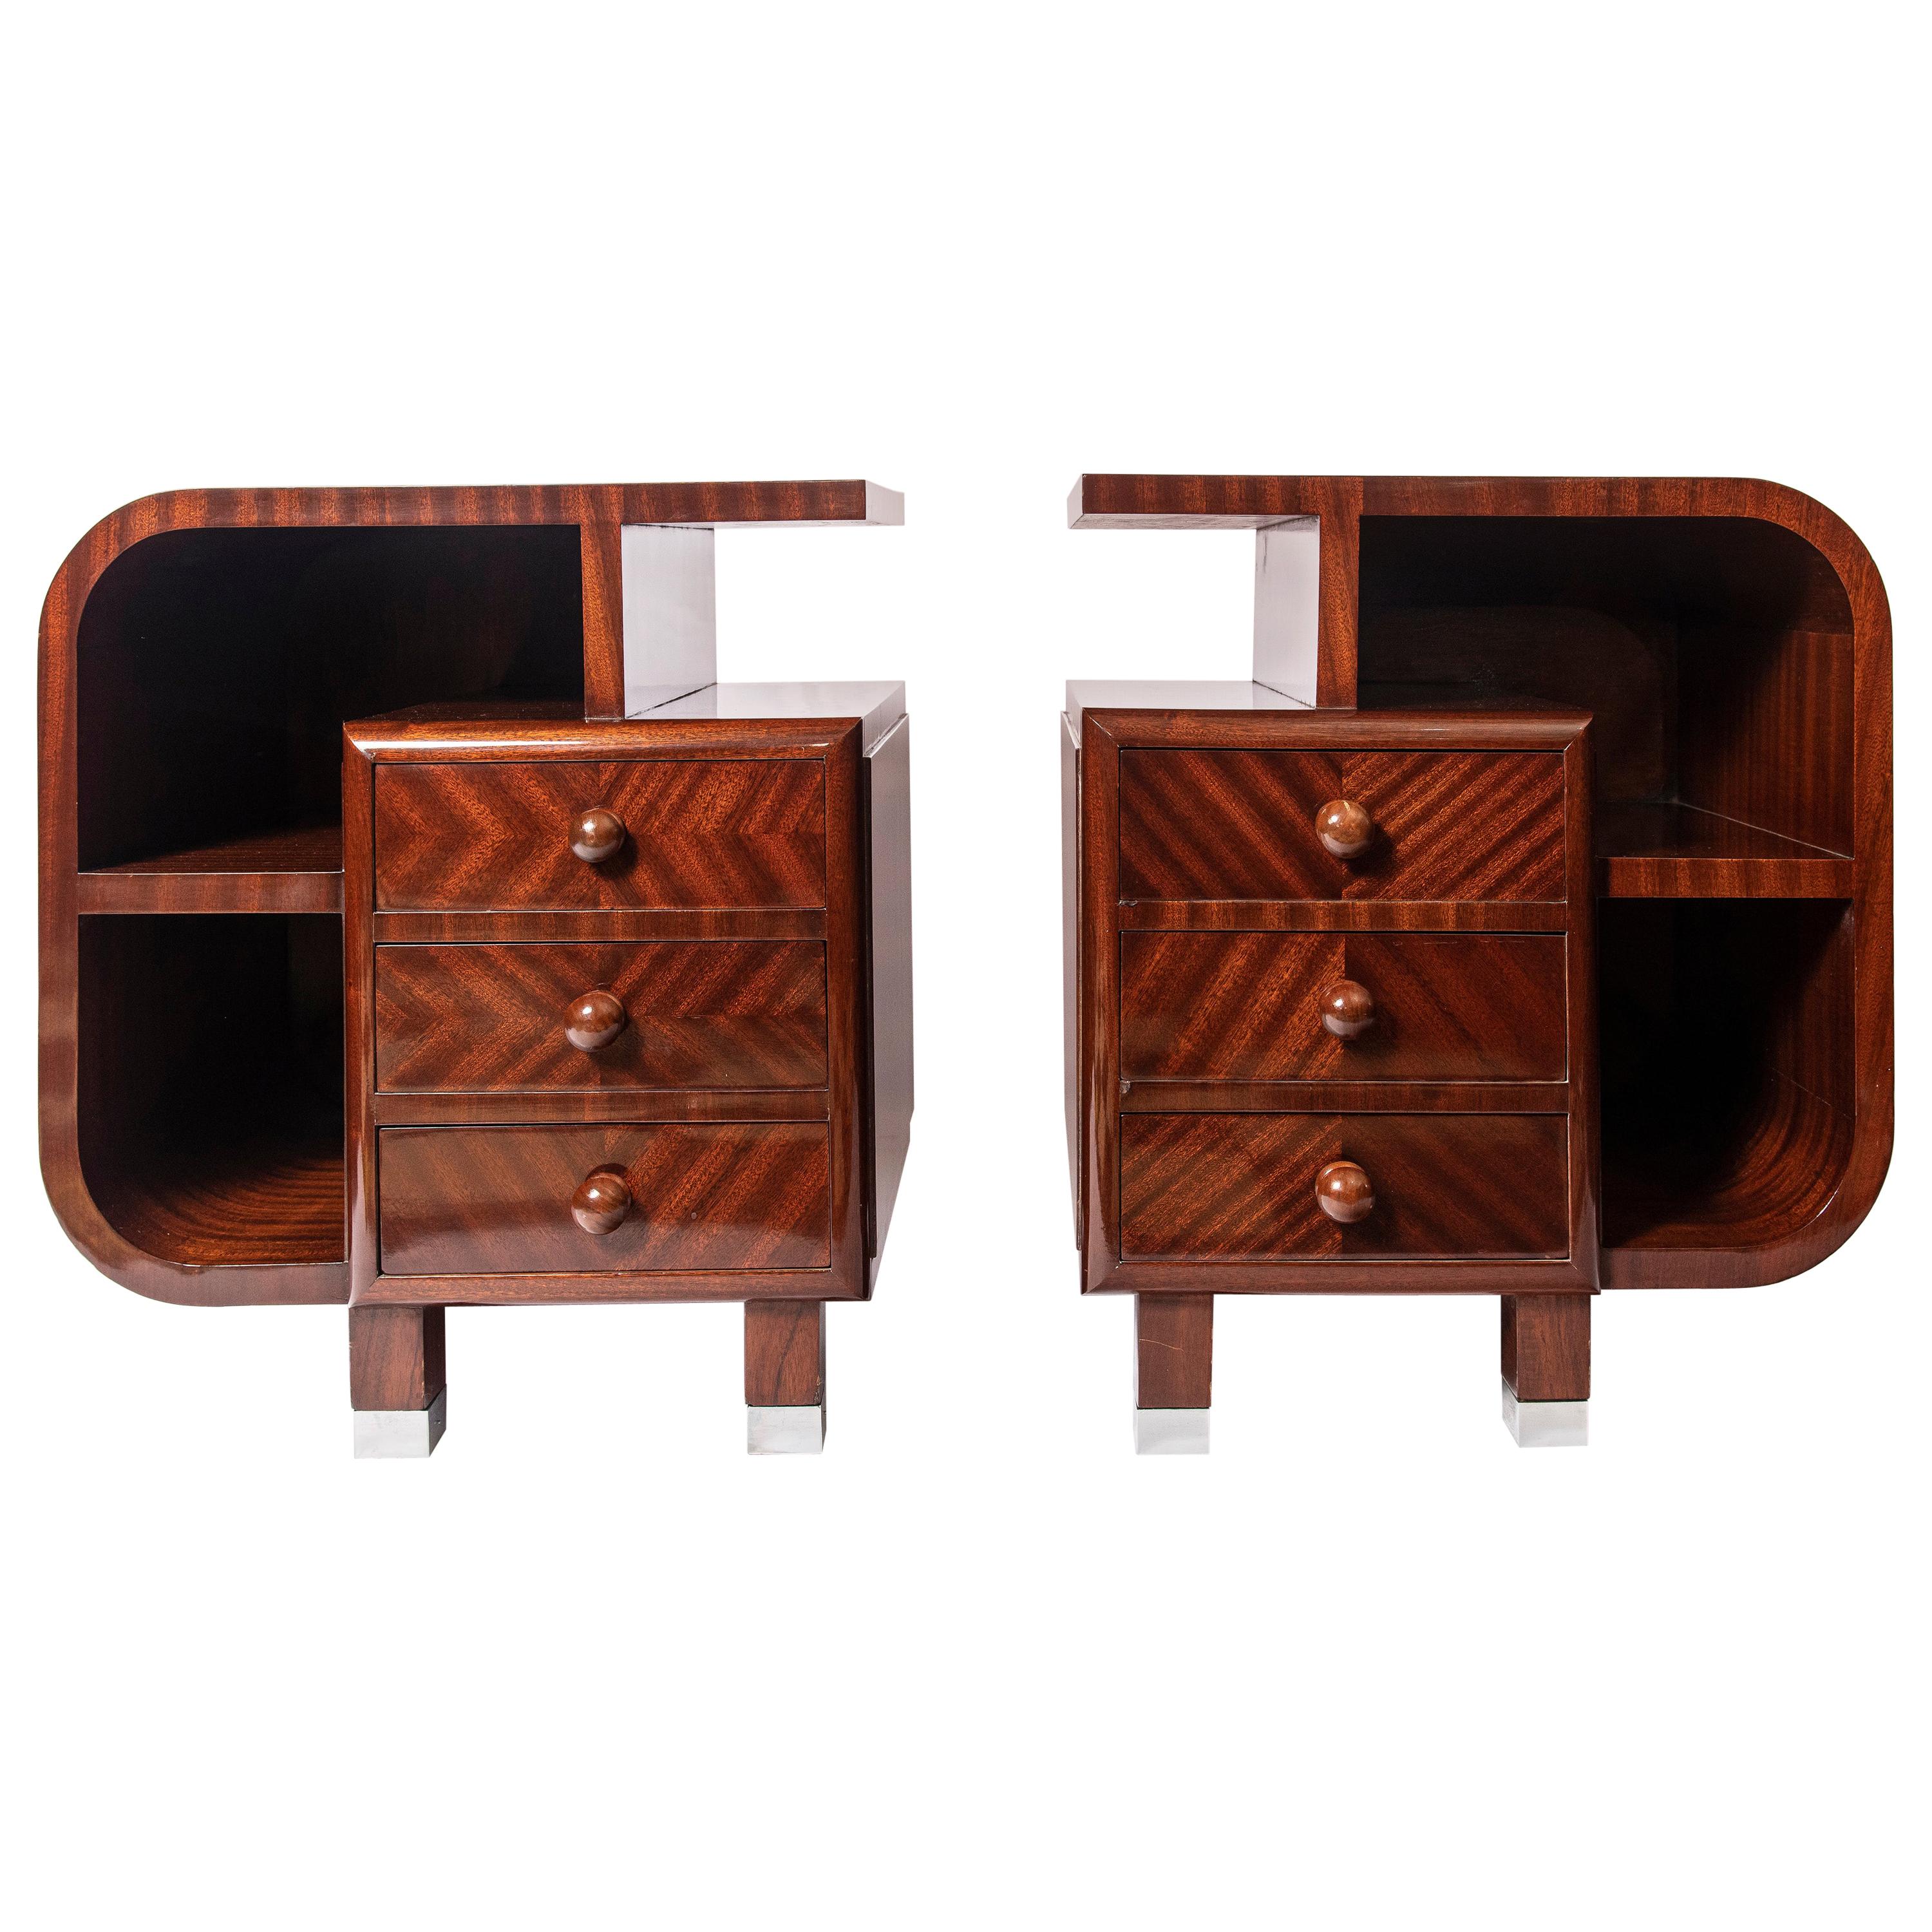 Pair of Wood Nightstands, Art Deco Period, France, circa 1940 For Sale